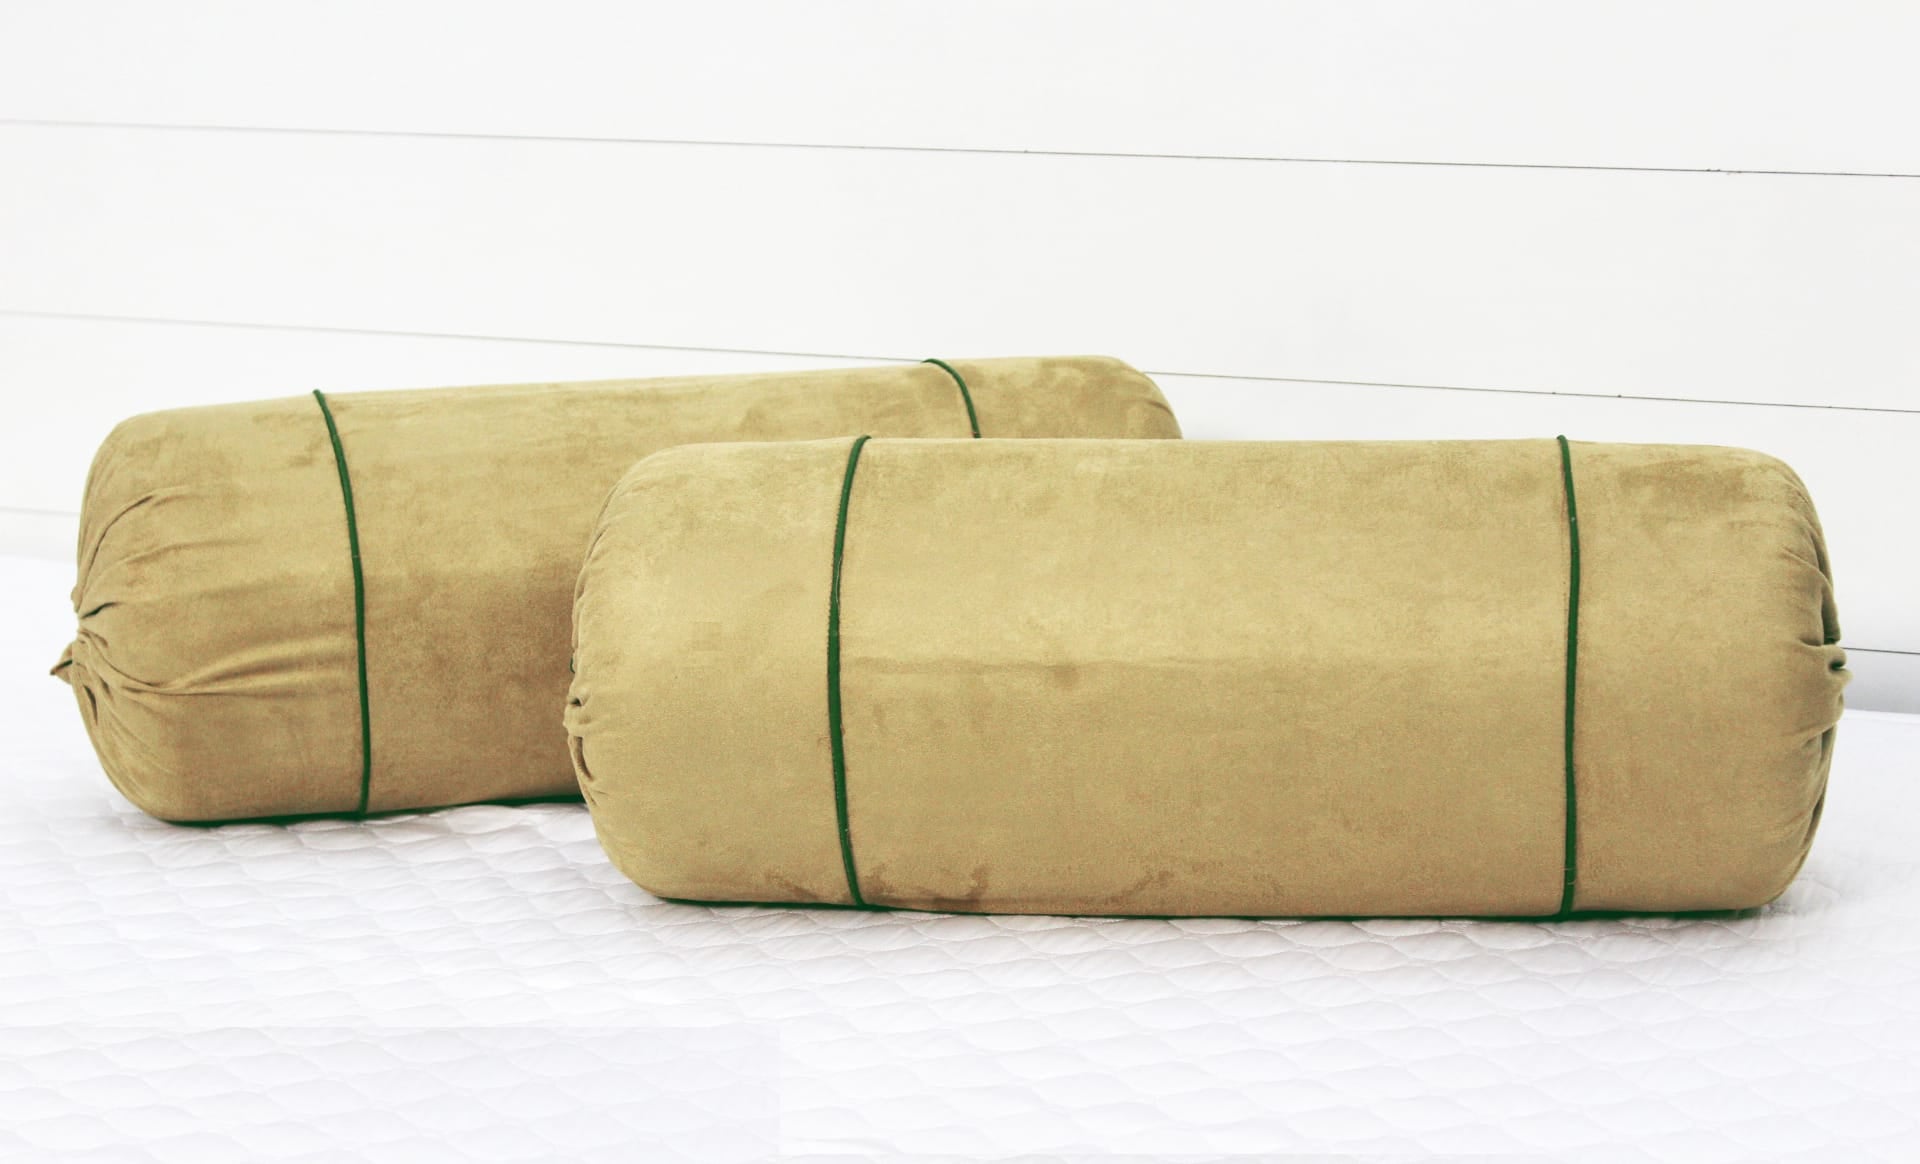 Luxurious Mehndi Green Velvet Bolster Cover Set in Imported Suede Polyester Material -2Pcs